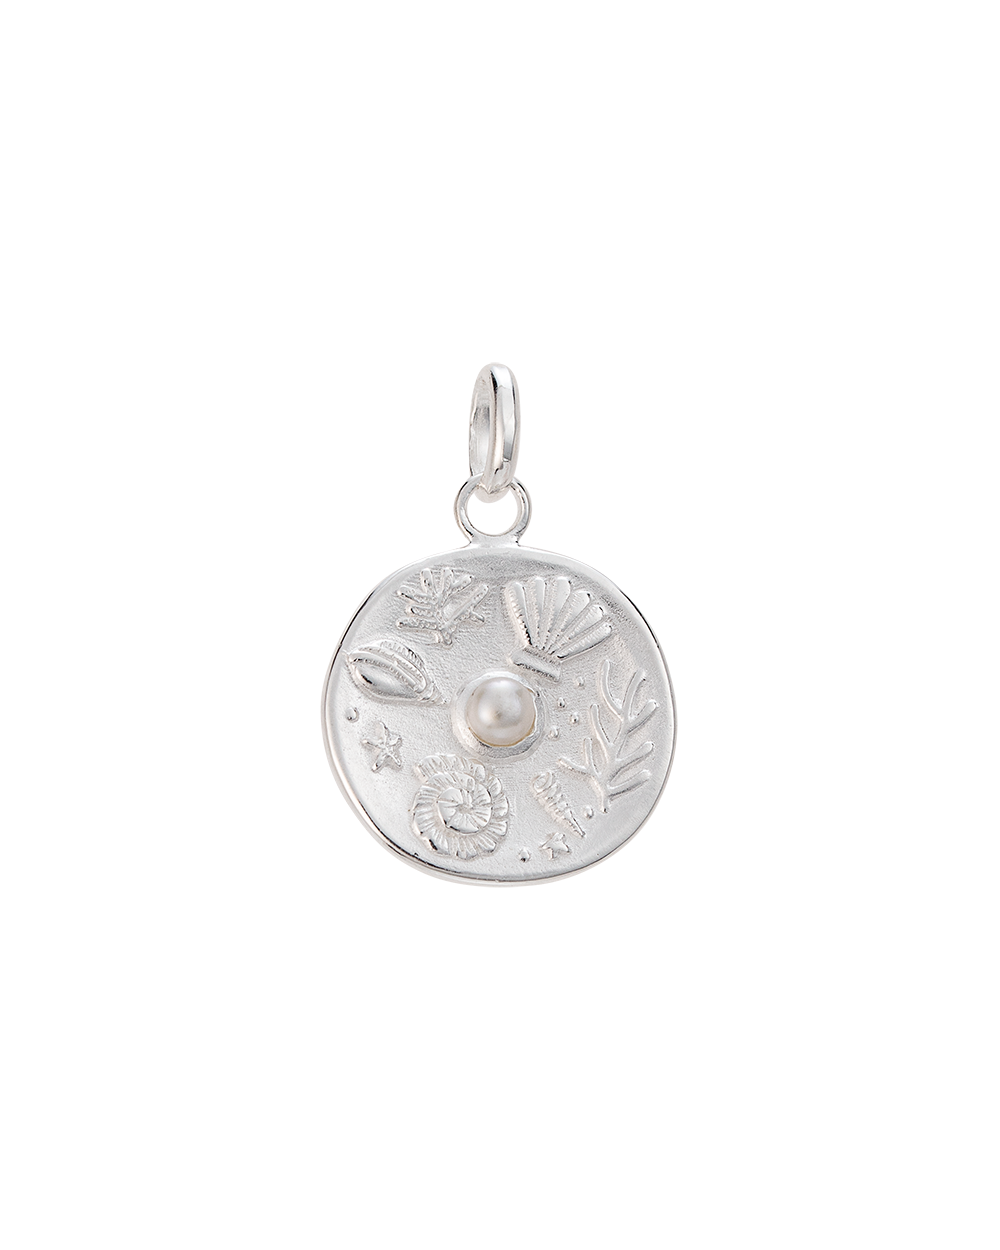 TINY BY THE SEA COIN (STERLING SILVER) – KIRSTIN ASH (Australia)